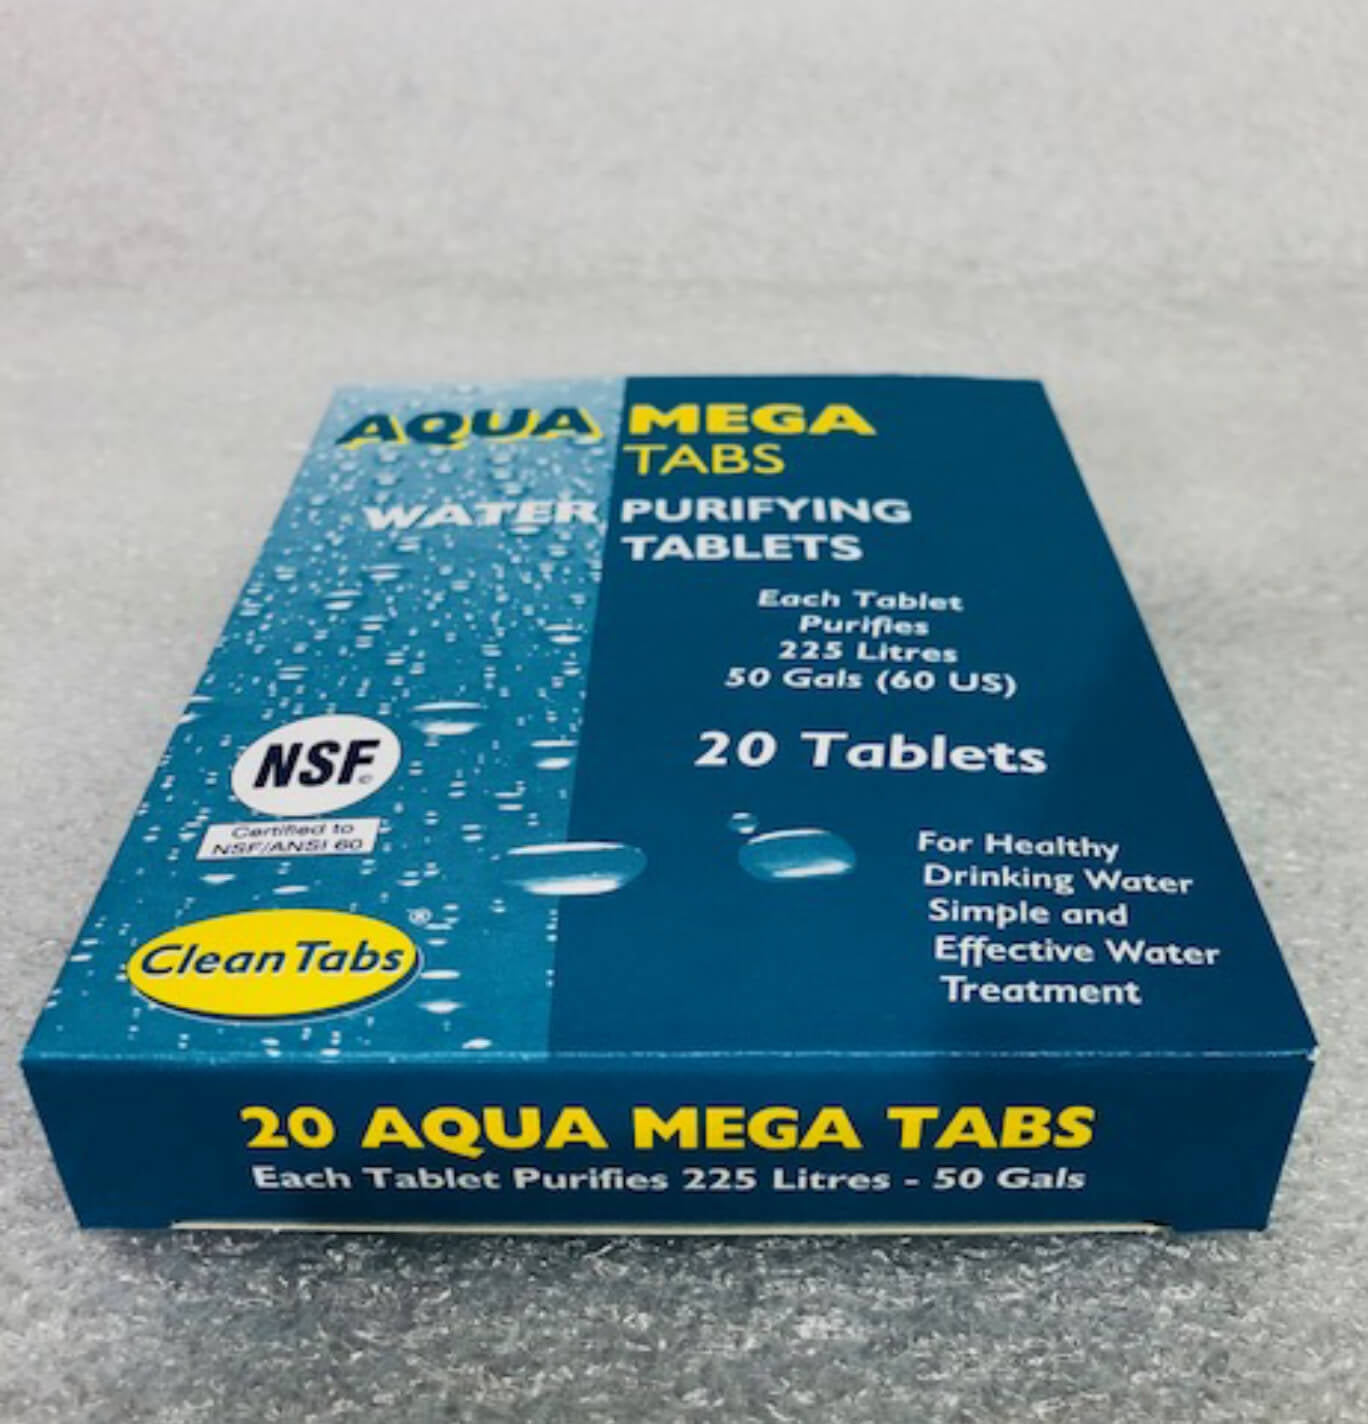 Clean Tabs Aqua Mega Water Purifying Tablets | Pack of 20 Image